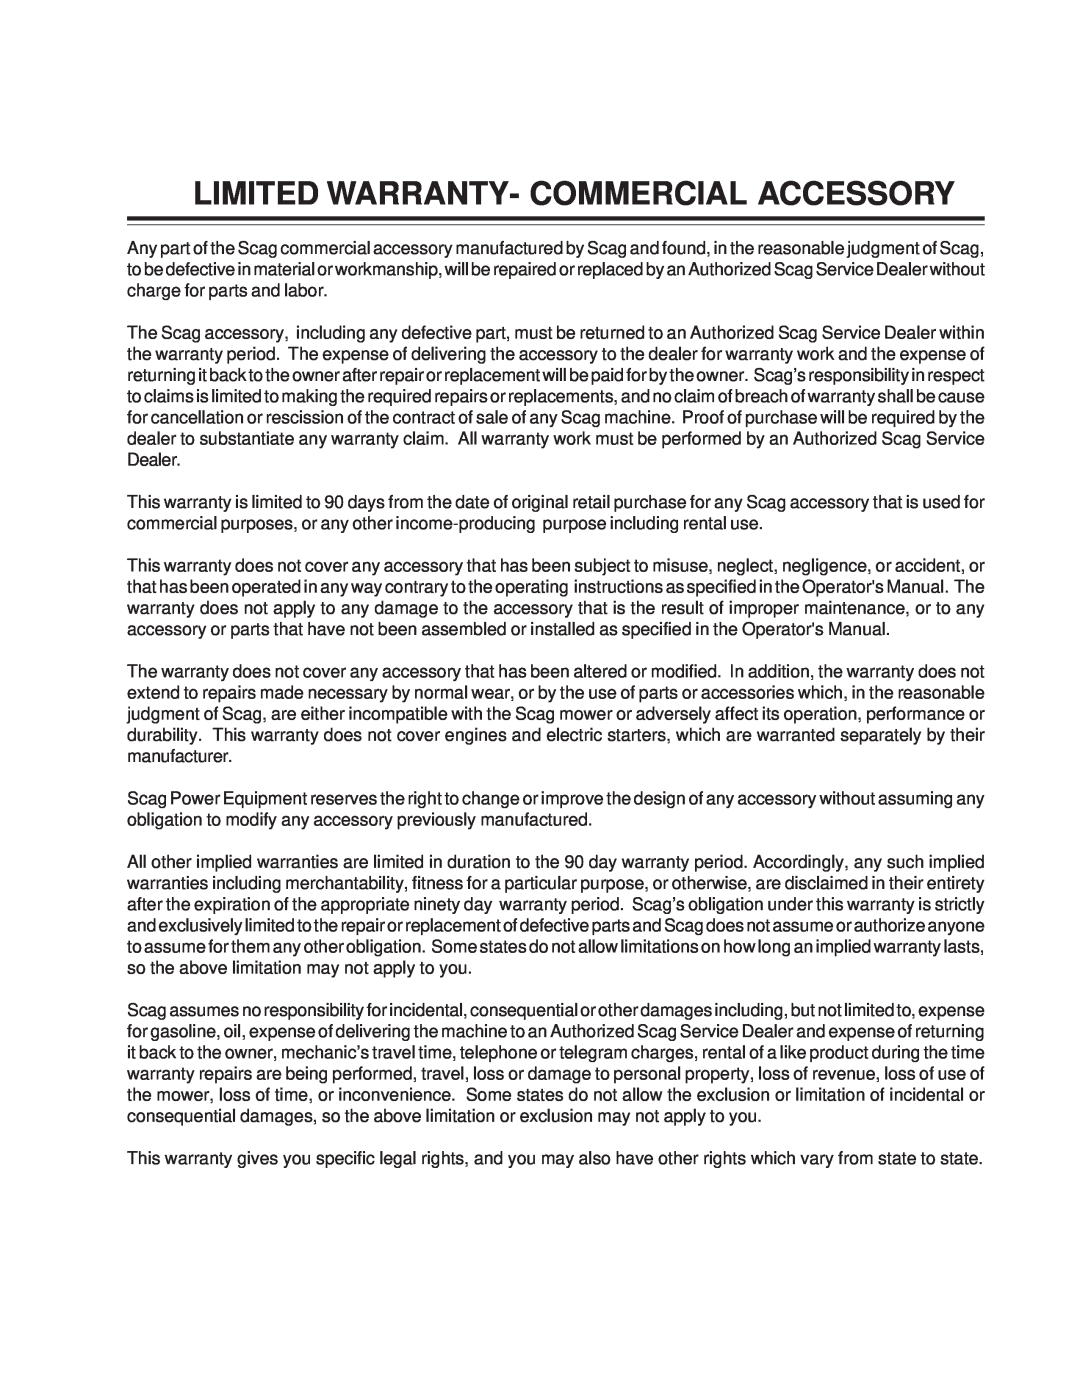 Scag Power Equipment GC-STWC-61V operating instructions Limited Warranty- Commercial Accessory 